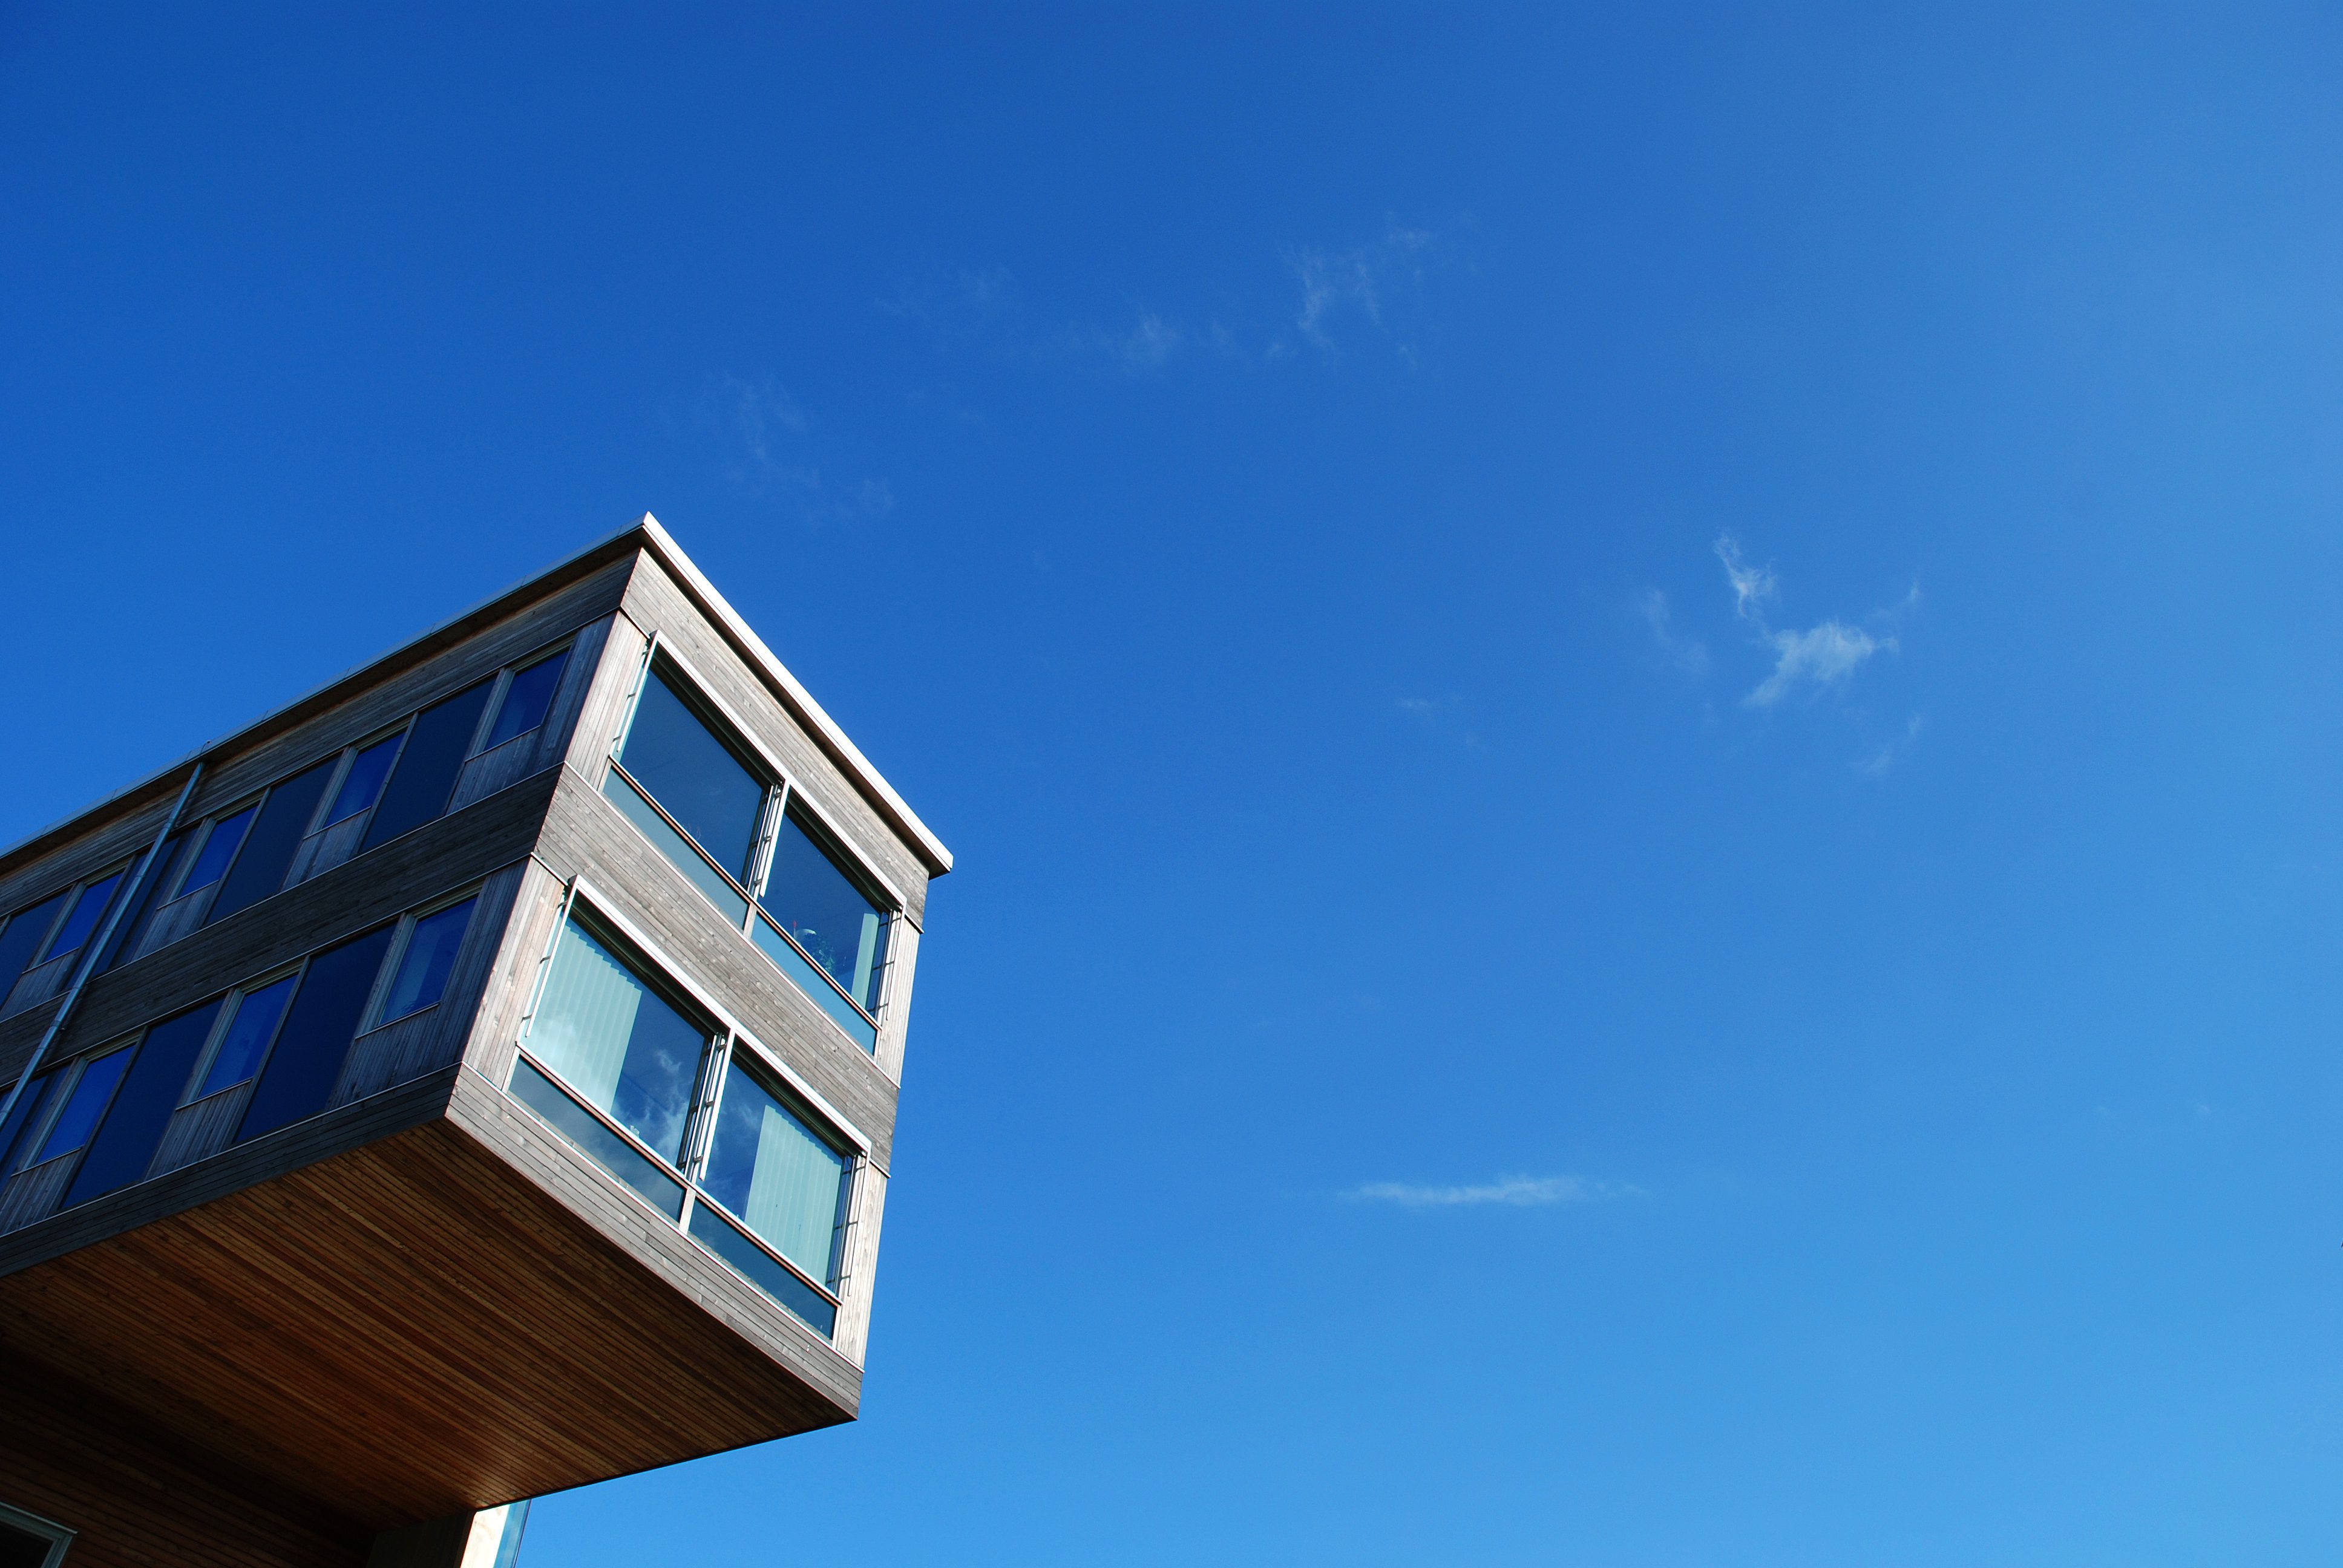 The cantelevered edge of a building against blue sky